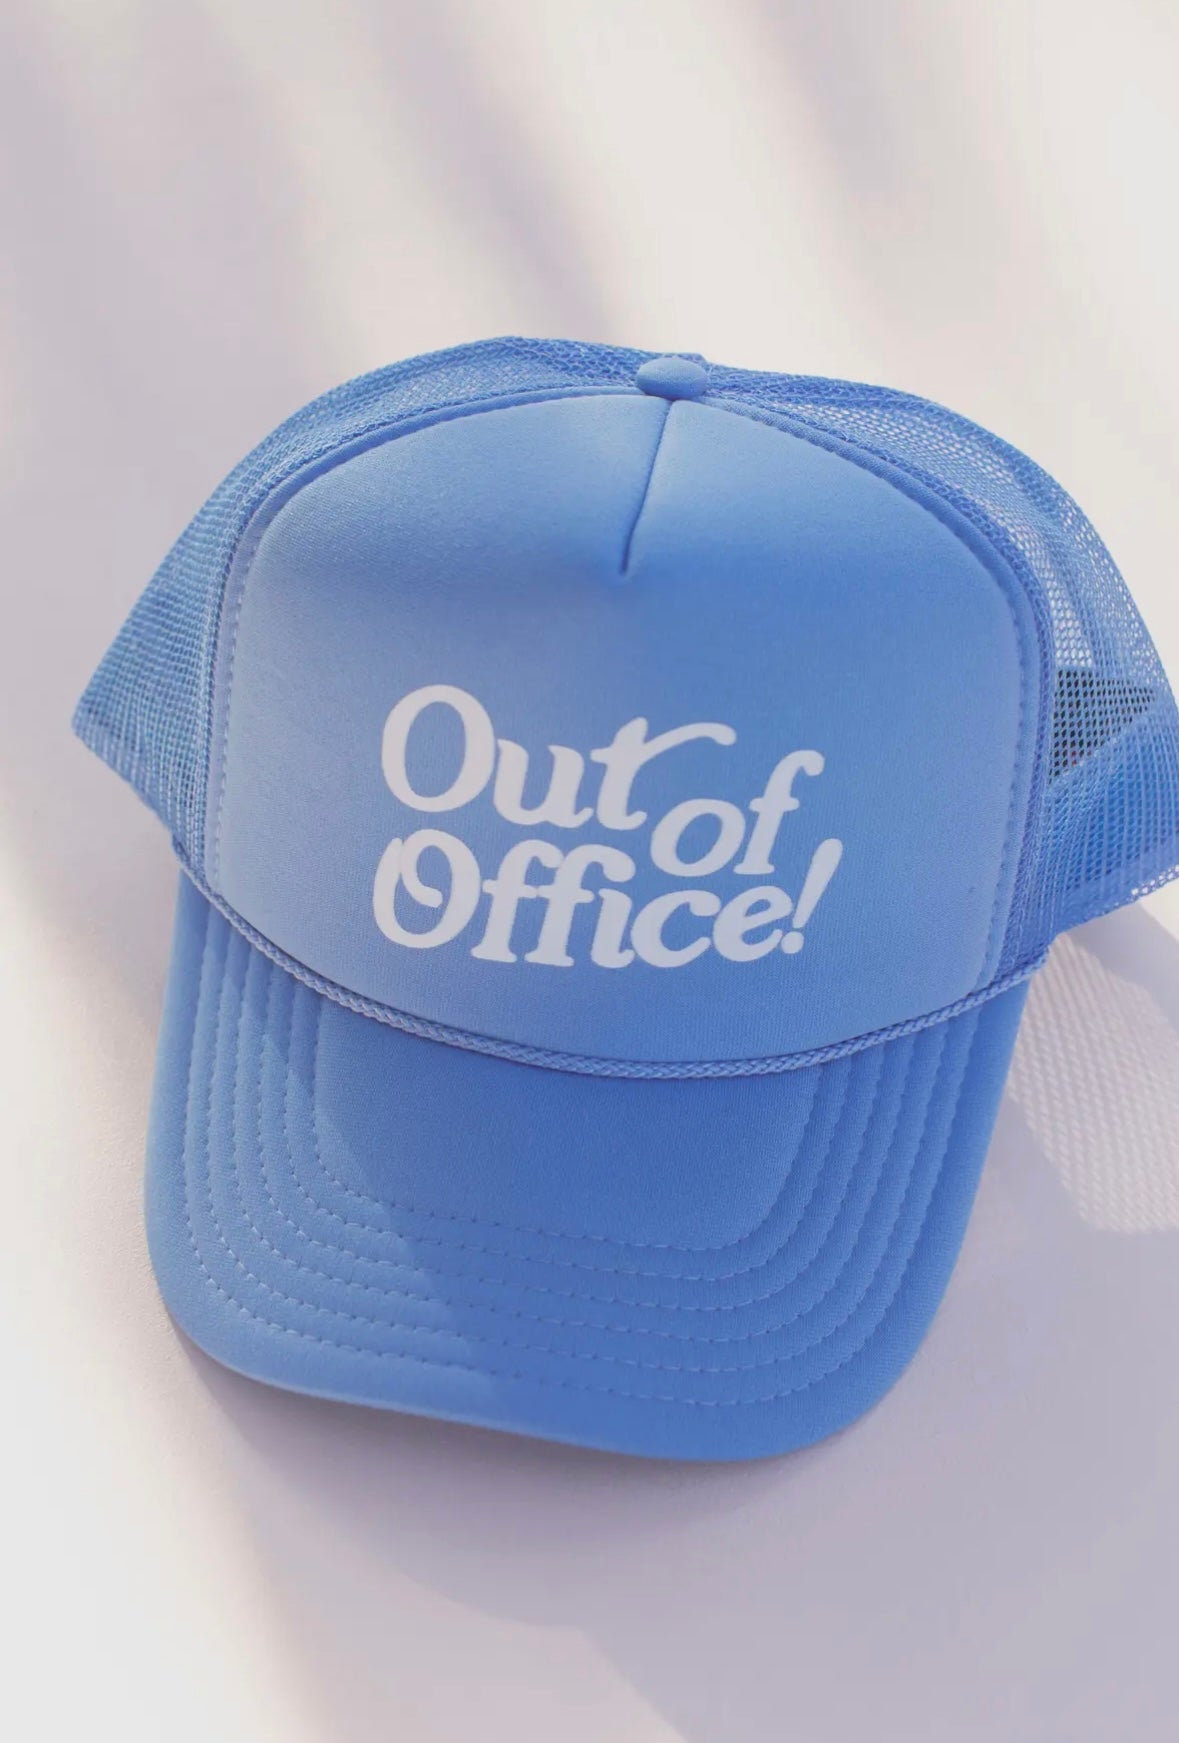 Out of Office! Trucker Hat